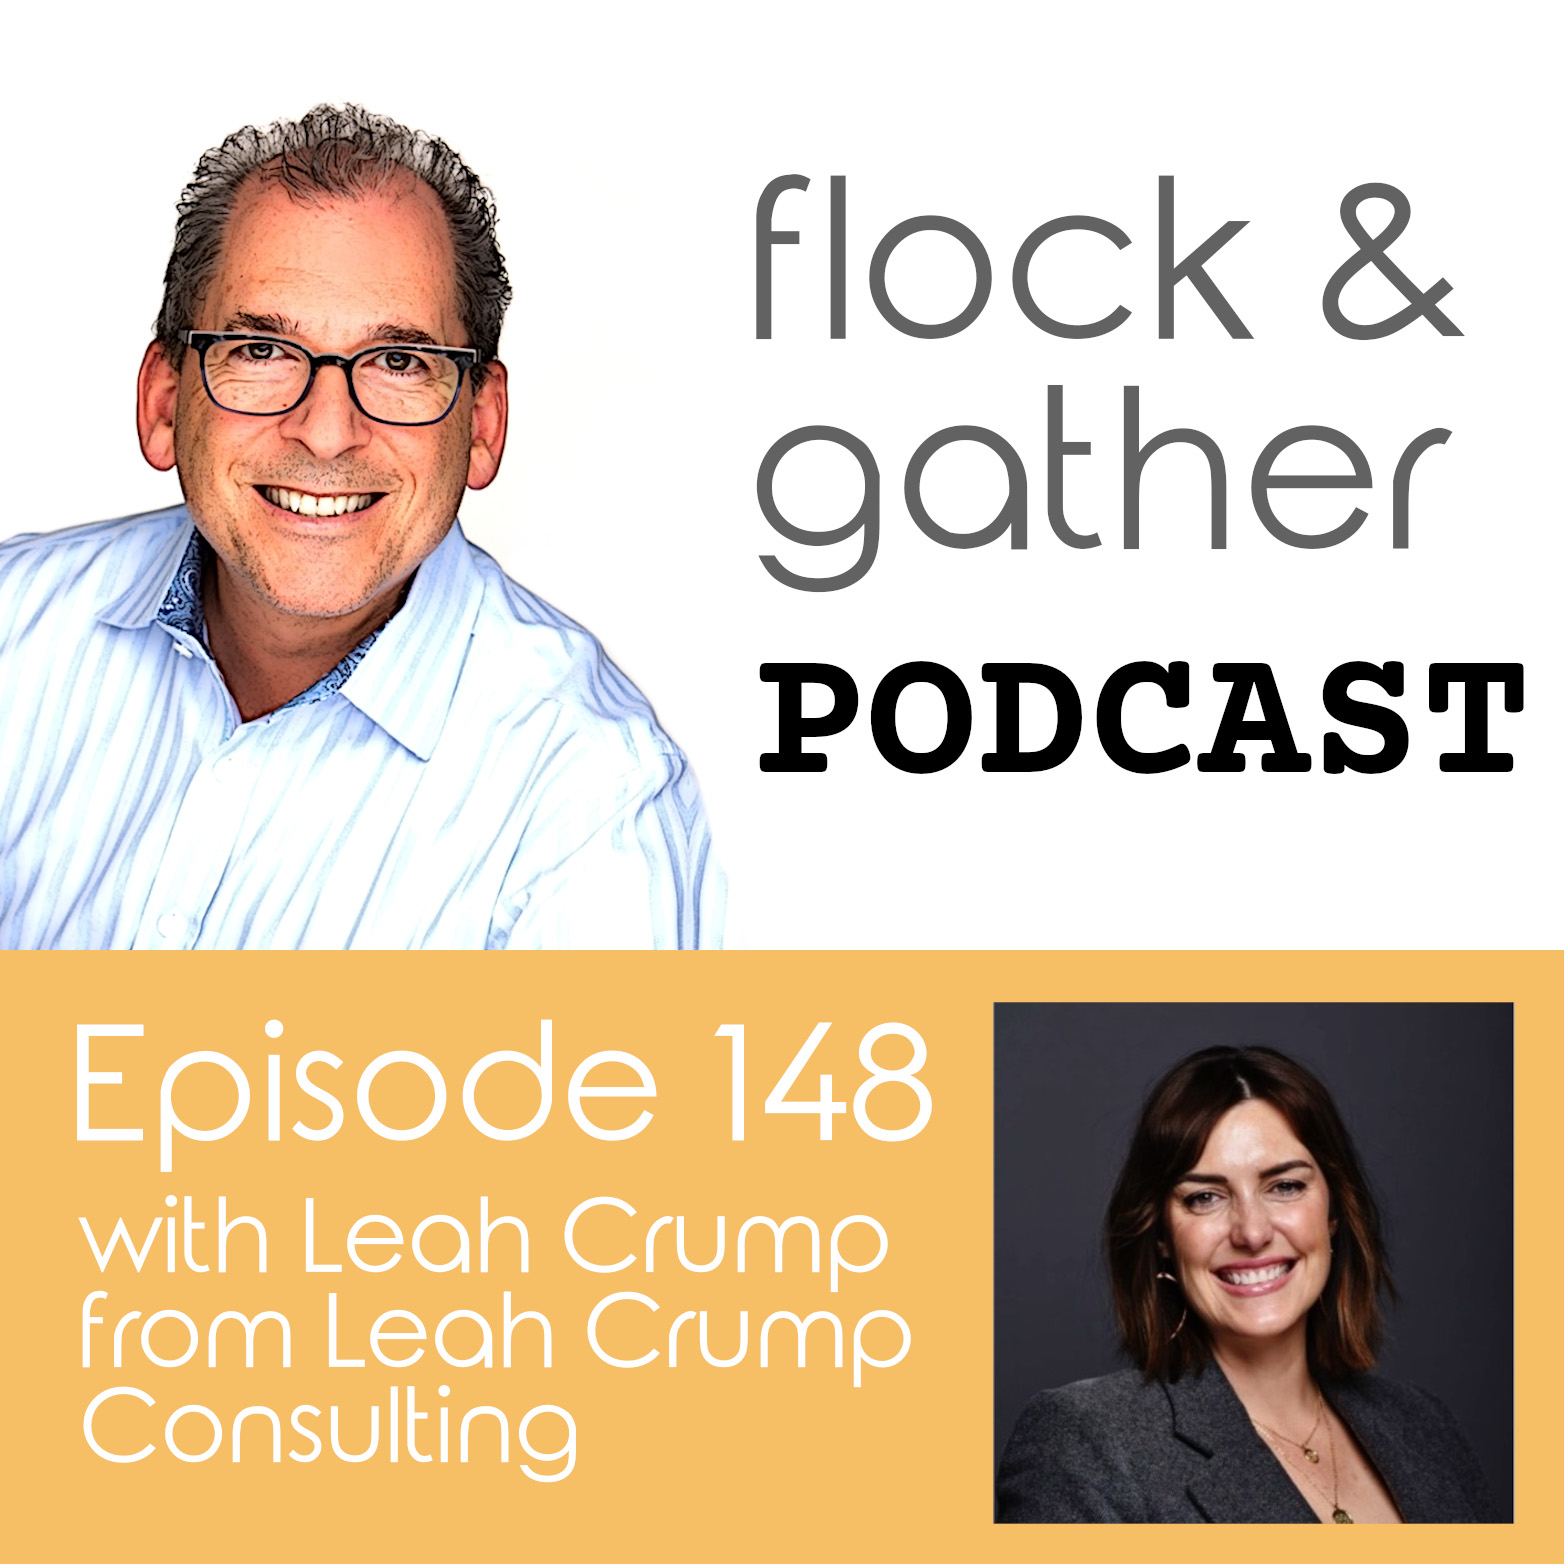 Flock and Gather Podcast.  Episode 148 with Leah Crump from Leah Crump Consulting